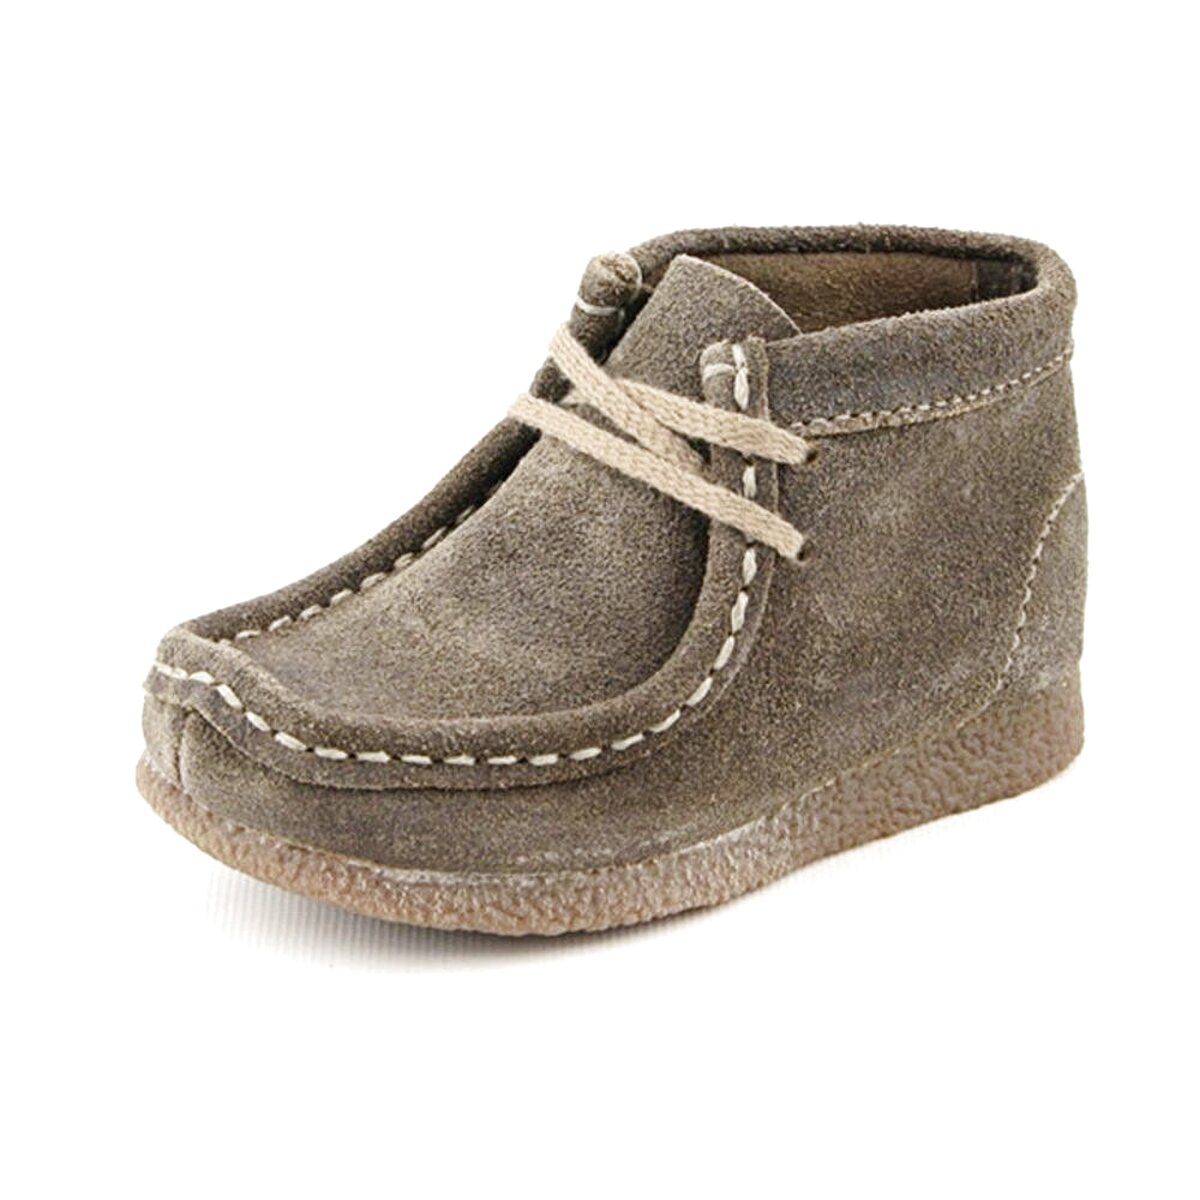 clarks baby shoes sale